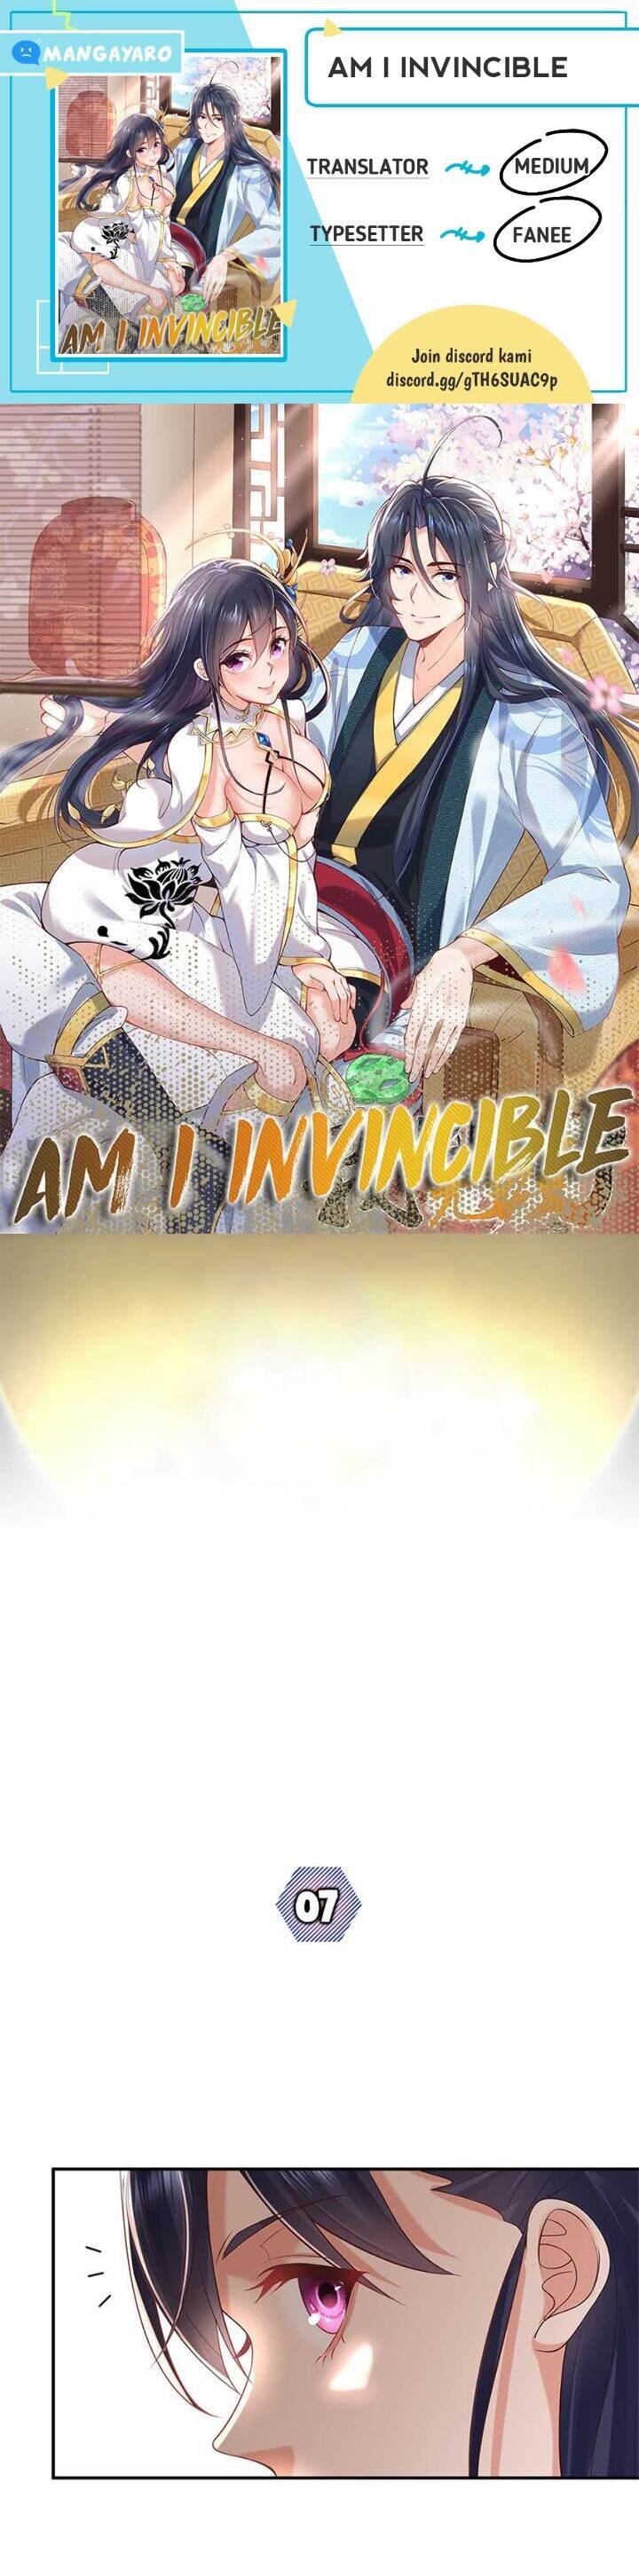 Am I Invincible Chapter 07